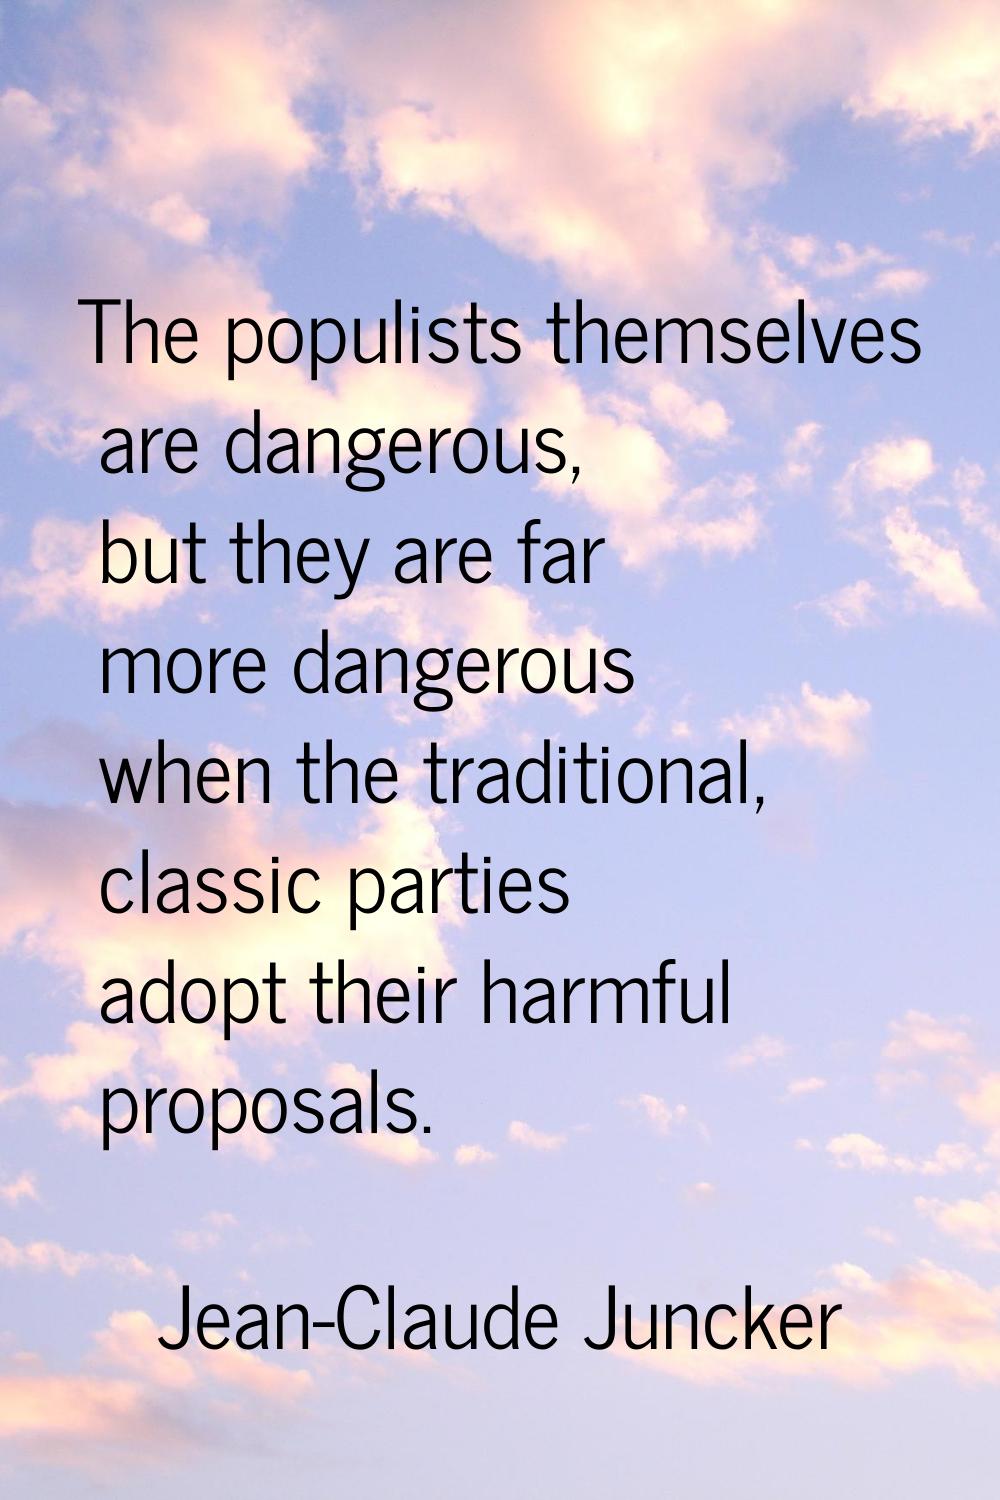 The populists themselves are dangerous, but they are far more dangerous when the traditional, class